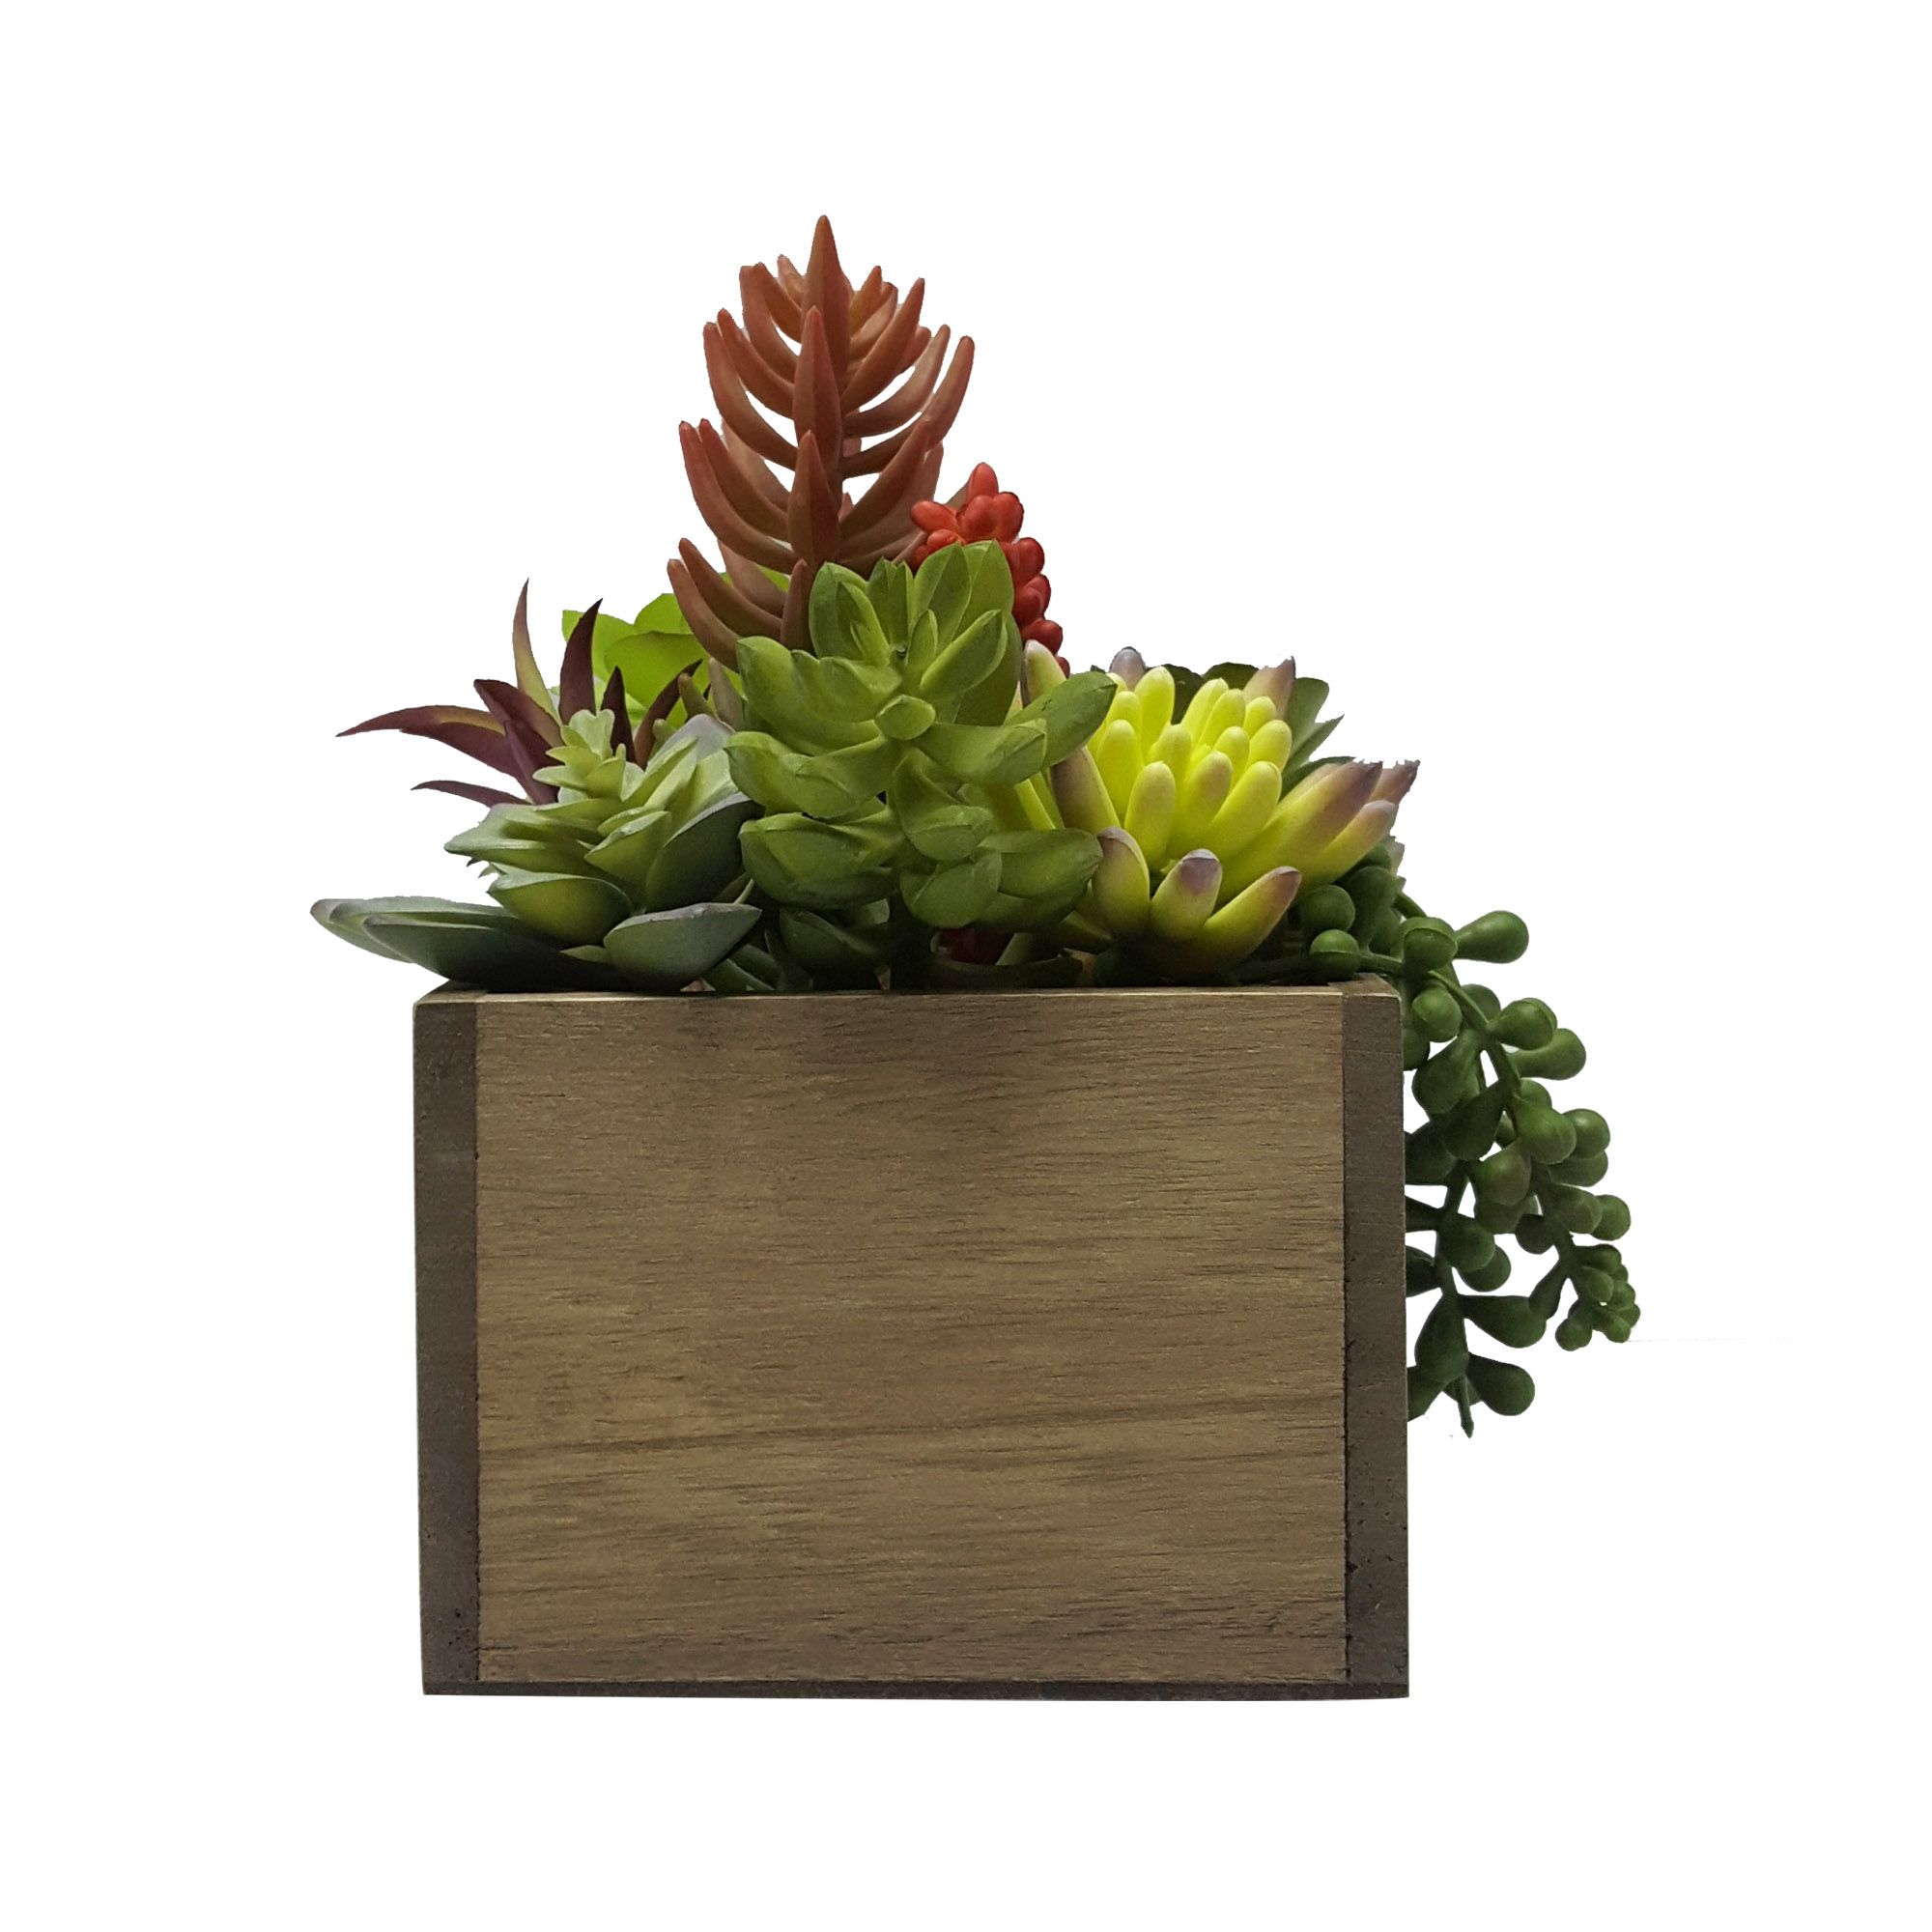 Better Homes & Gardens 7.5" Artificial Mixed Succulent Plants in Brown Wood Box - image 2 of 7